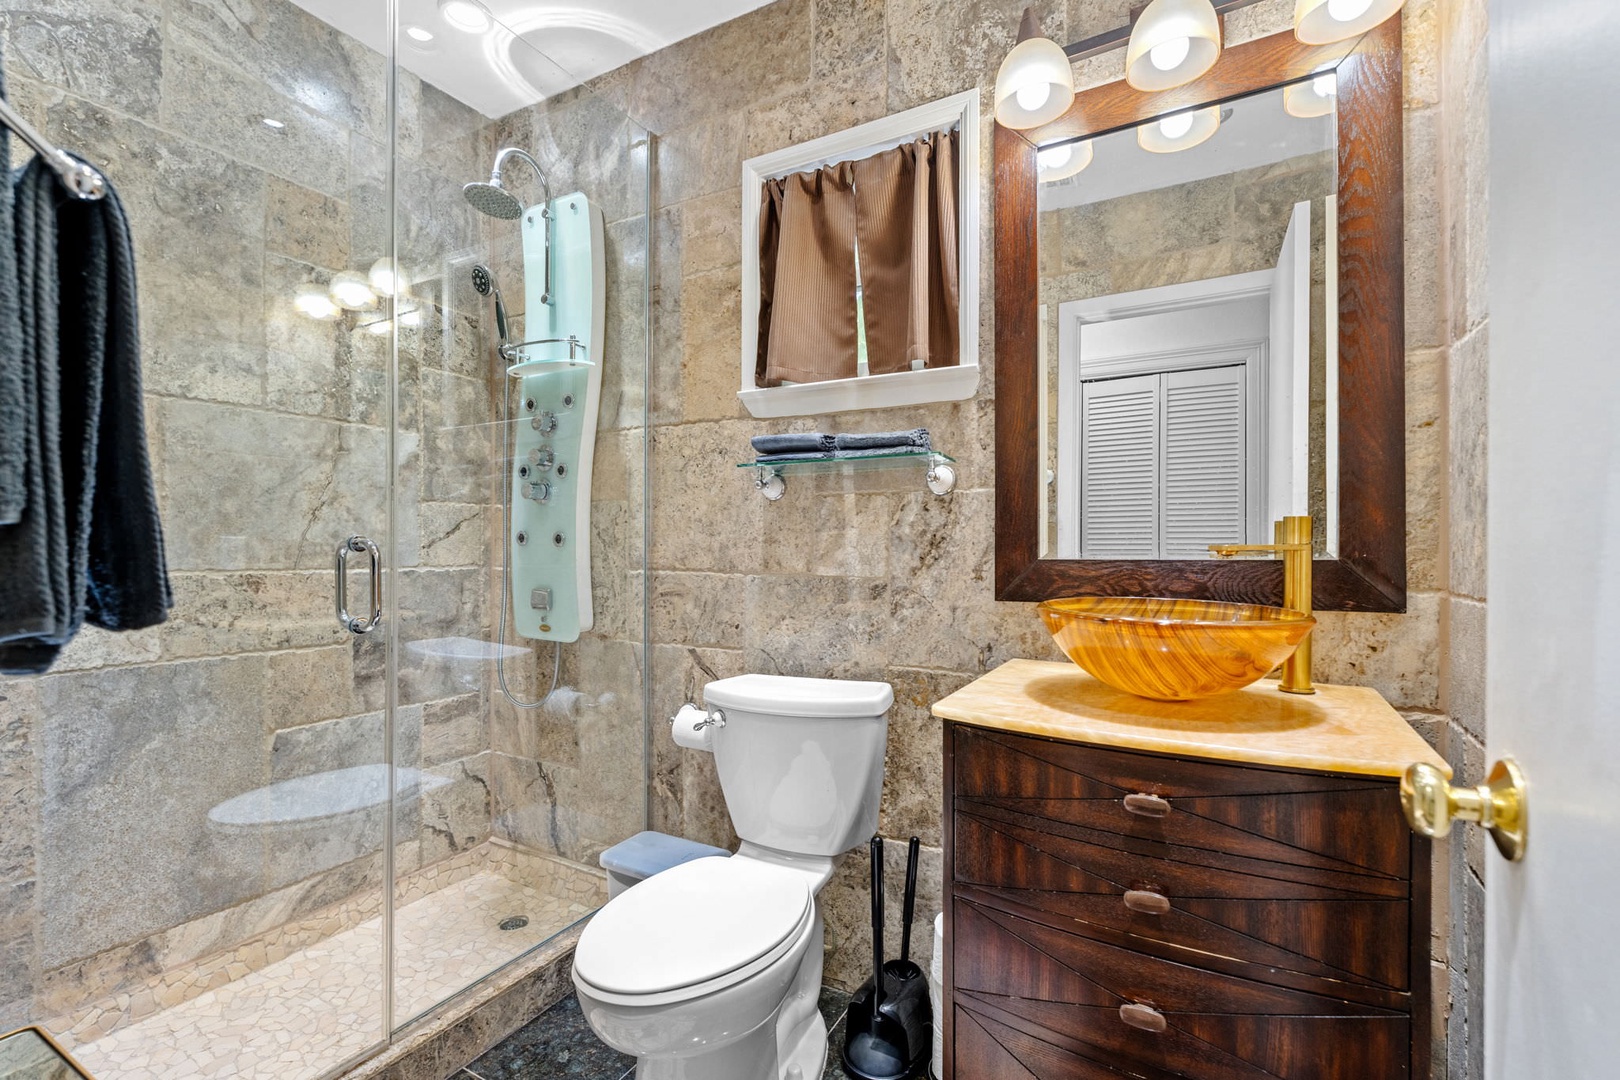 Bathroom with stand up shower (Unit B)